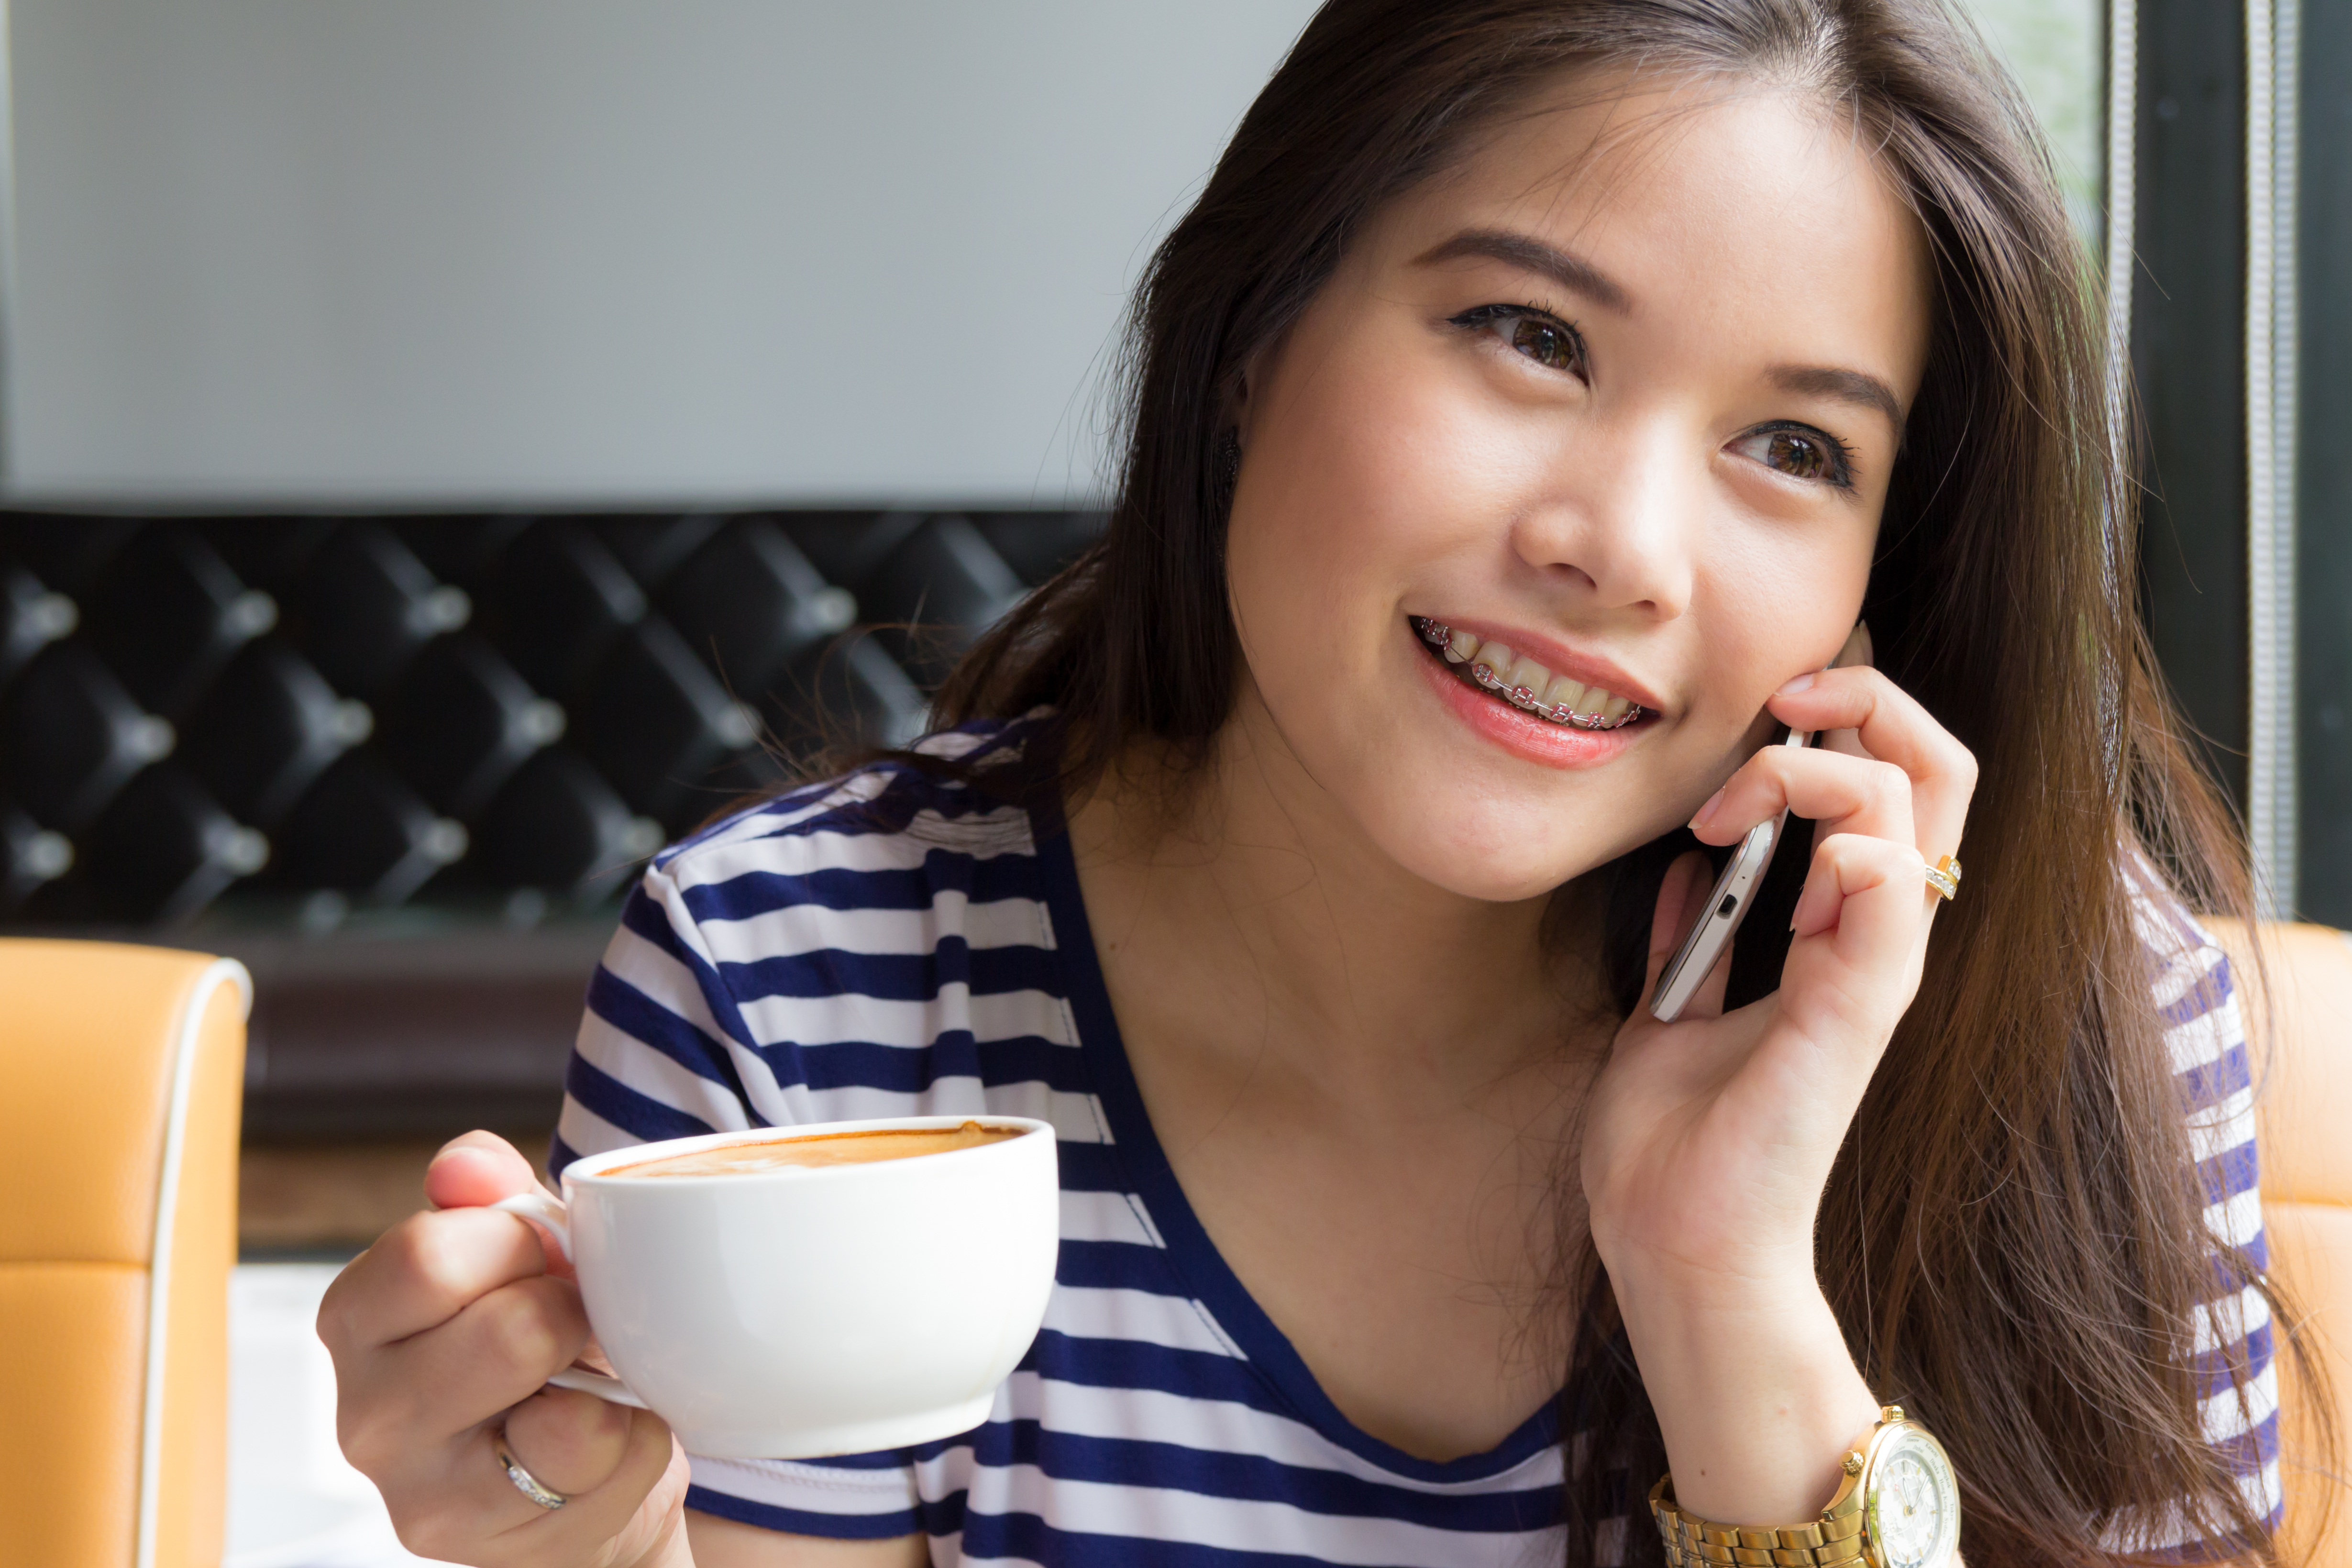 Young Asian woman with braces holds a cup of coffee and a phone.